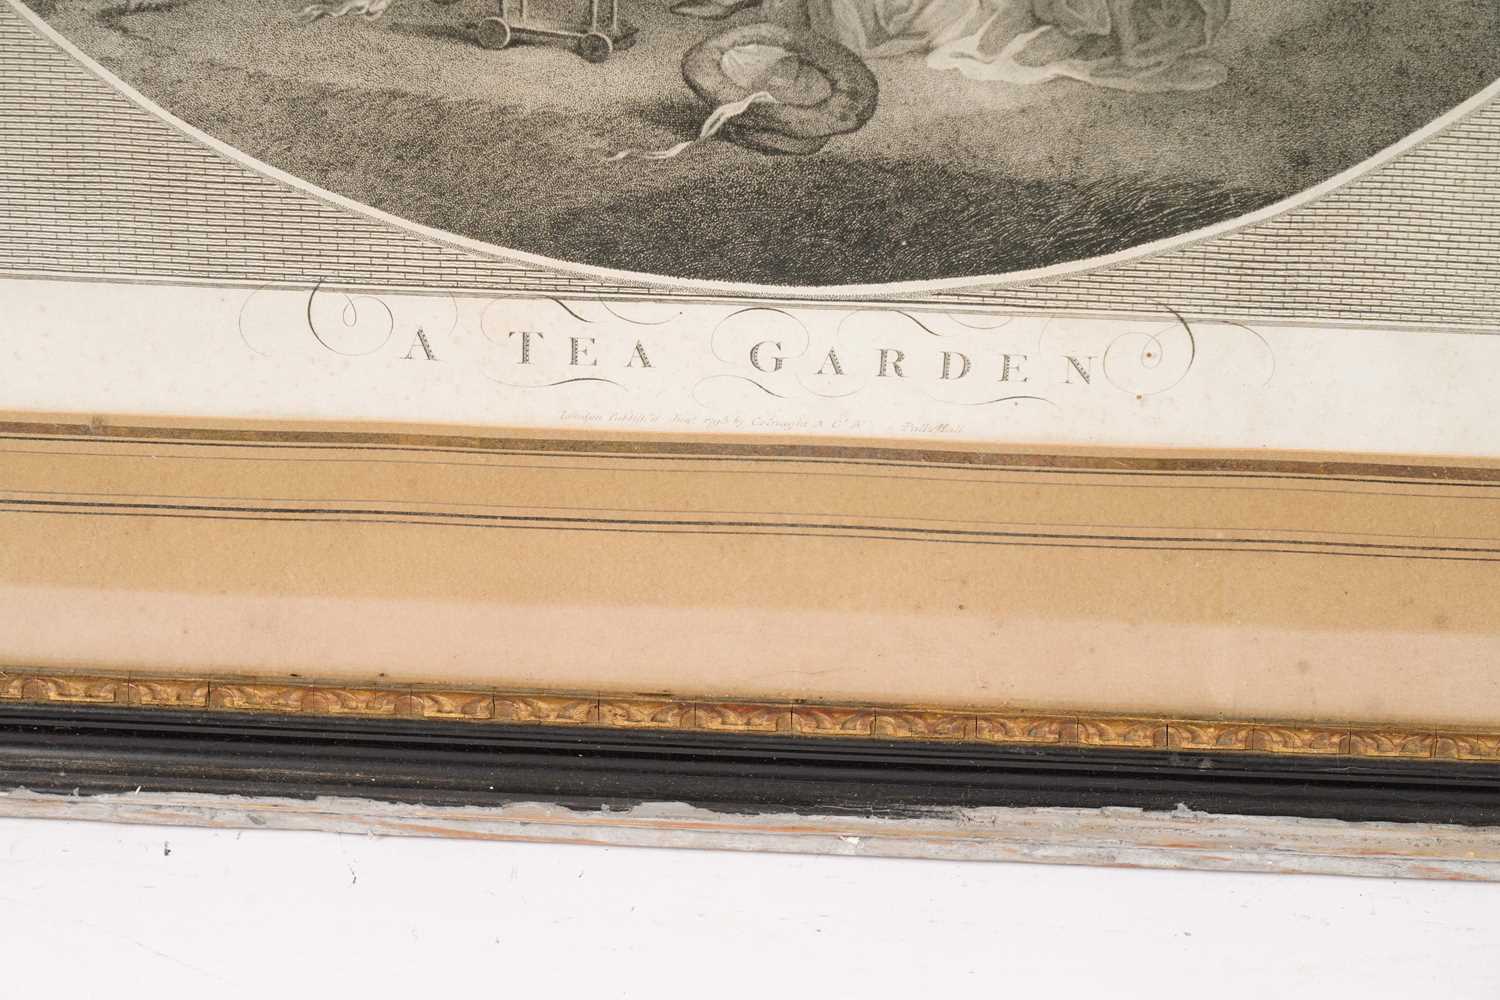 After George Morland - A Tea Garden | stipple engraving (1793) - Image 6 of 9